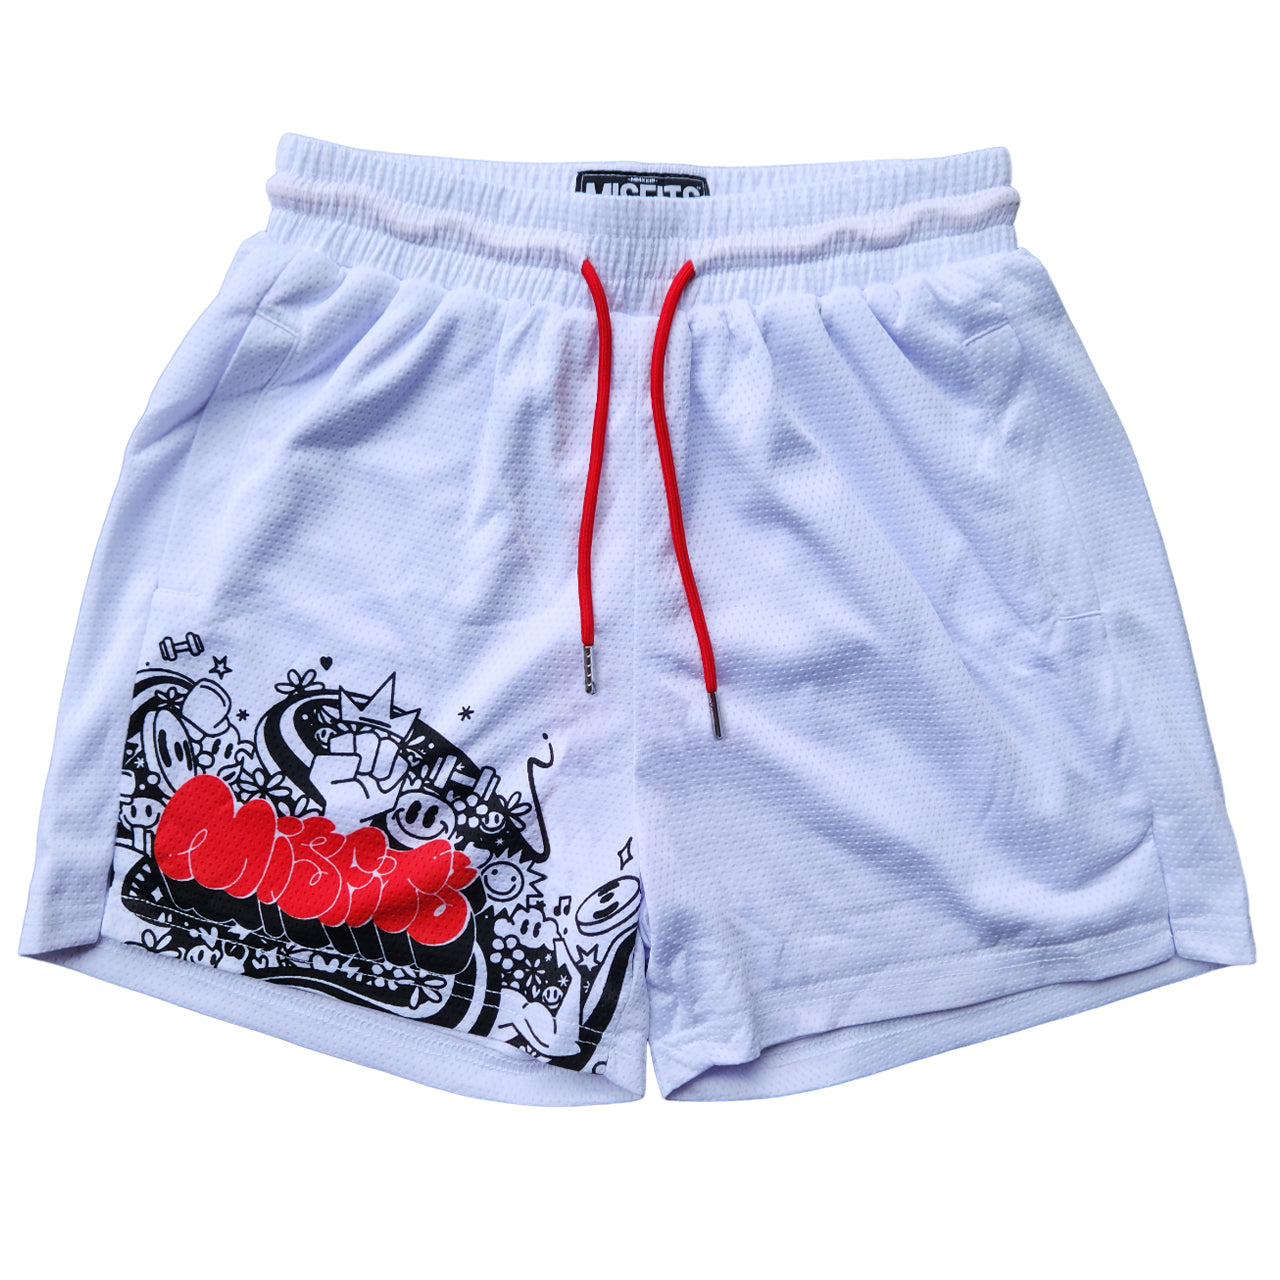 "MISFITS" LIFTING SHORTS [4" INSEAM] - WHITE/RED